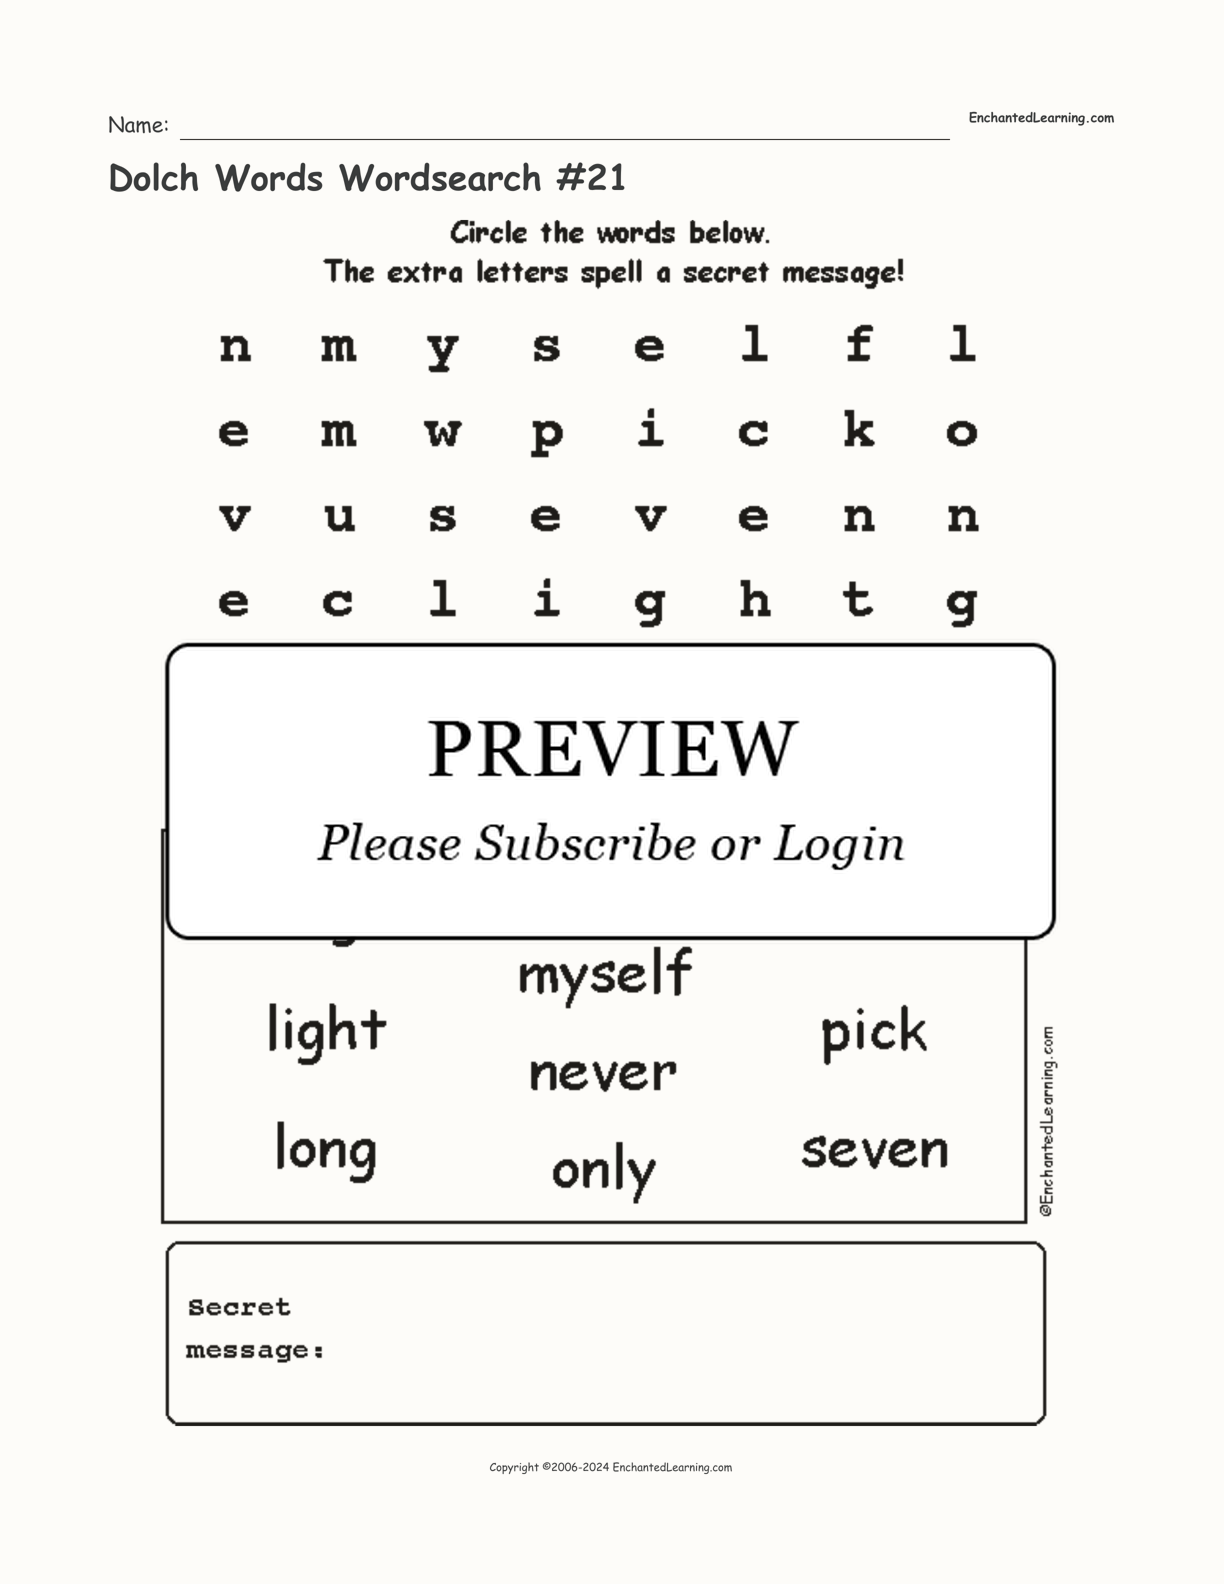 Dolch Words Wordsearch #21 interactive worksheet page 1